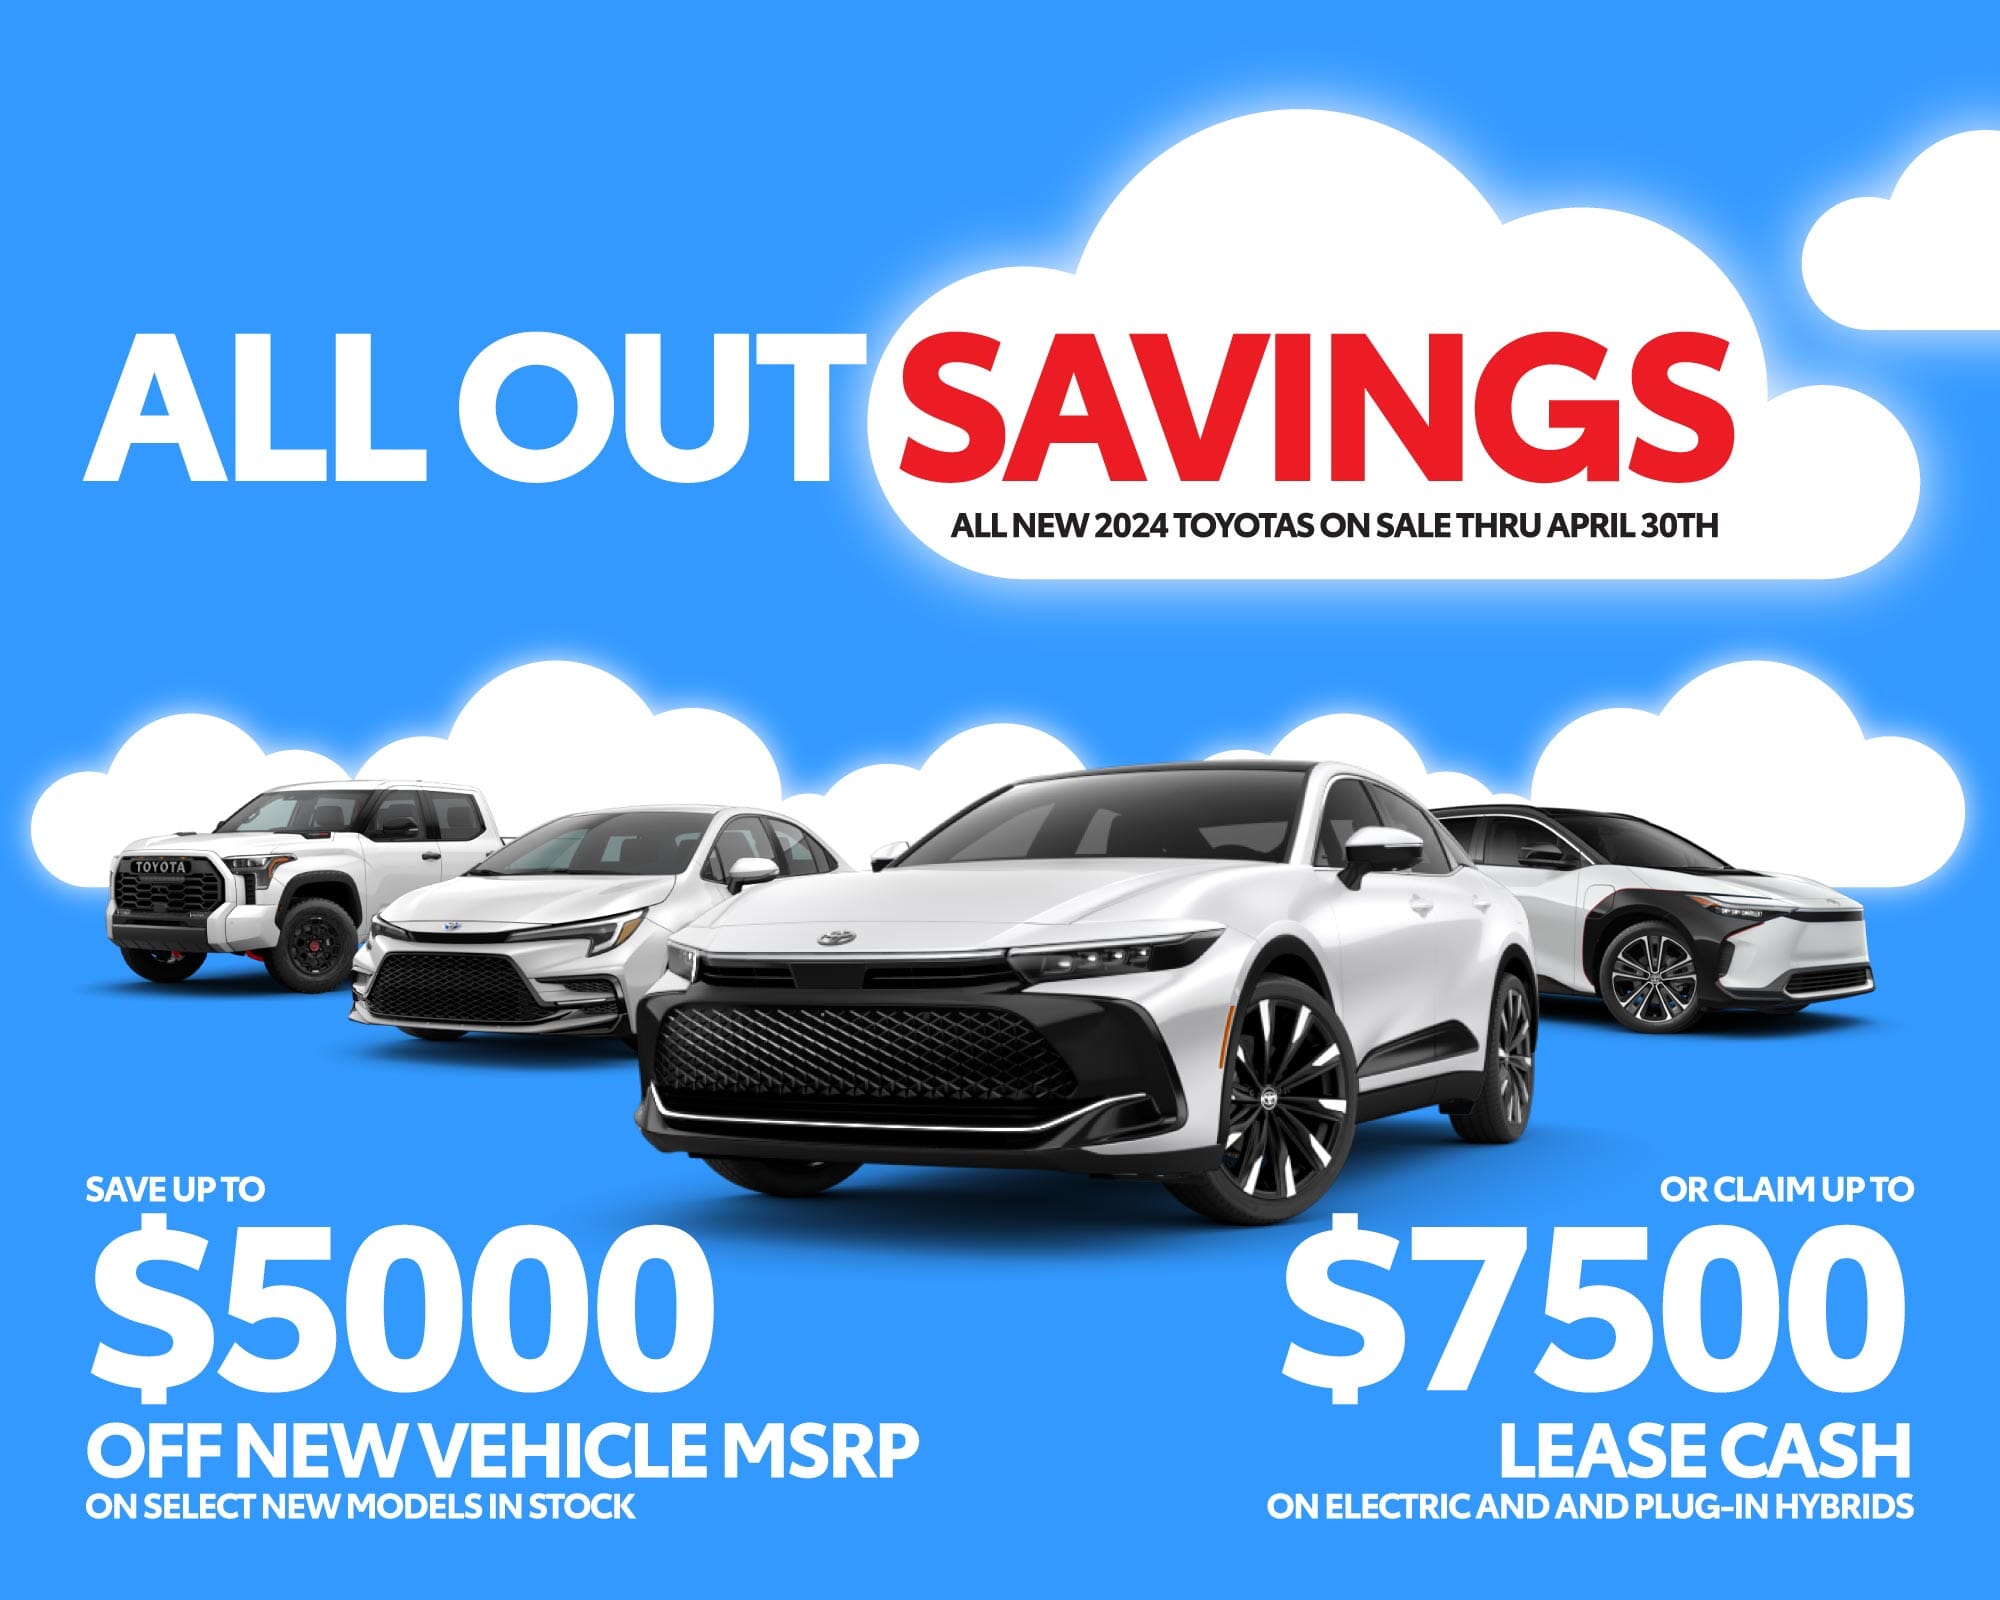 Miami Toyota dealer: $5000 off MSRP on new Toyota